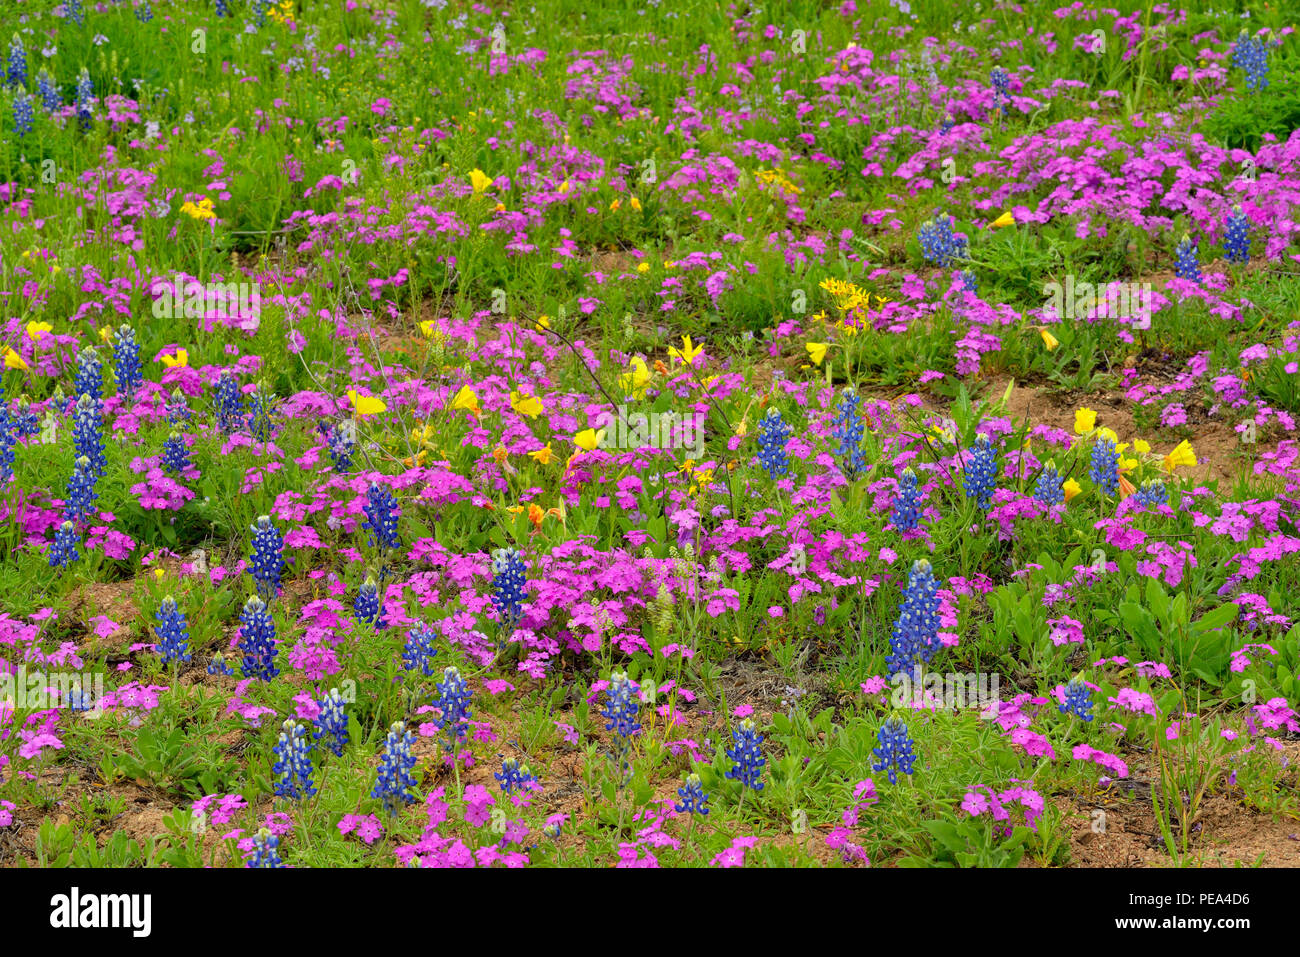 Phlox, primrose and bluebonnets in bloom, Willow City Loop, Gillespie County, Texas, USA Stock Photo